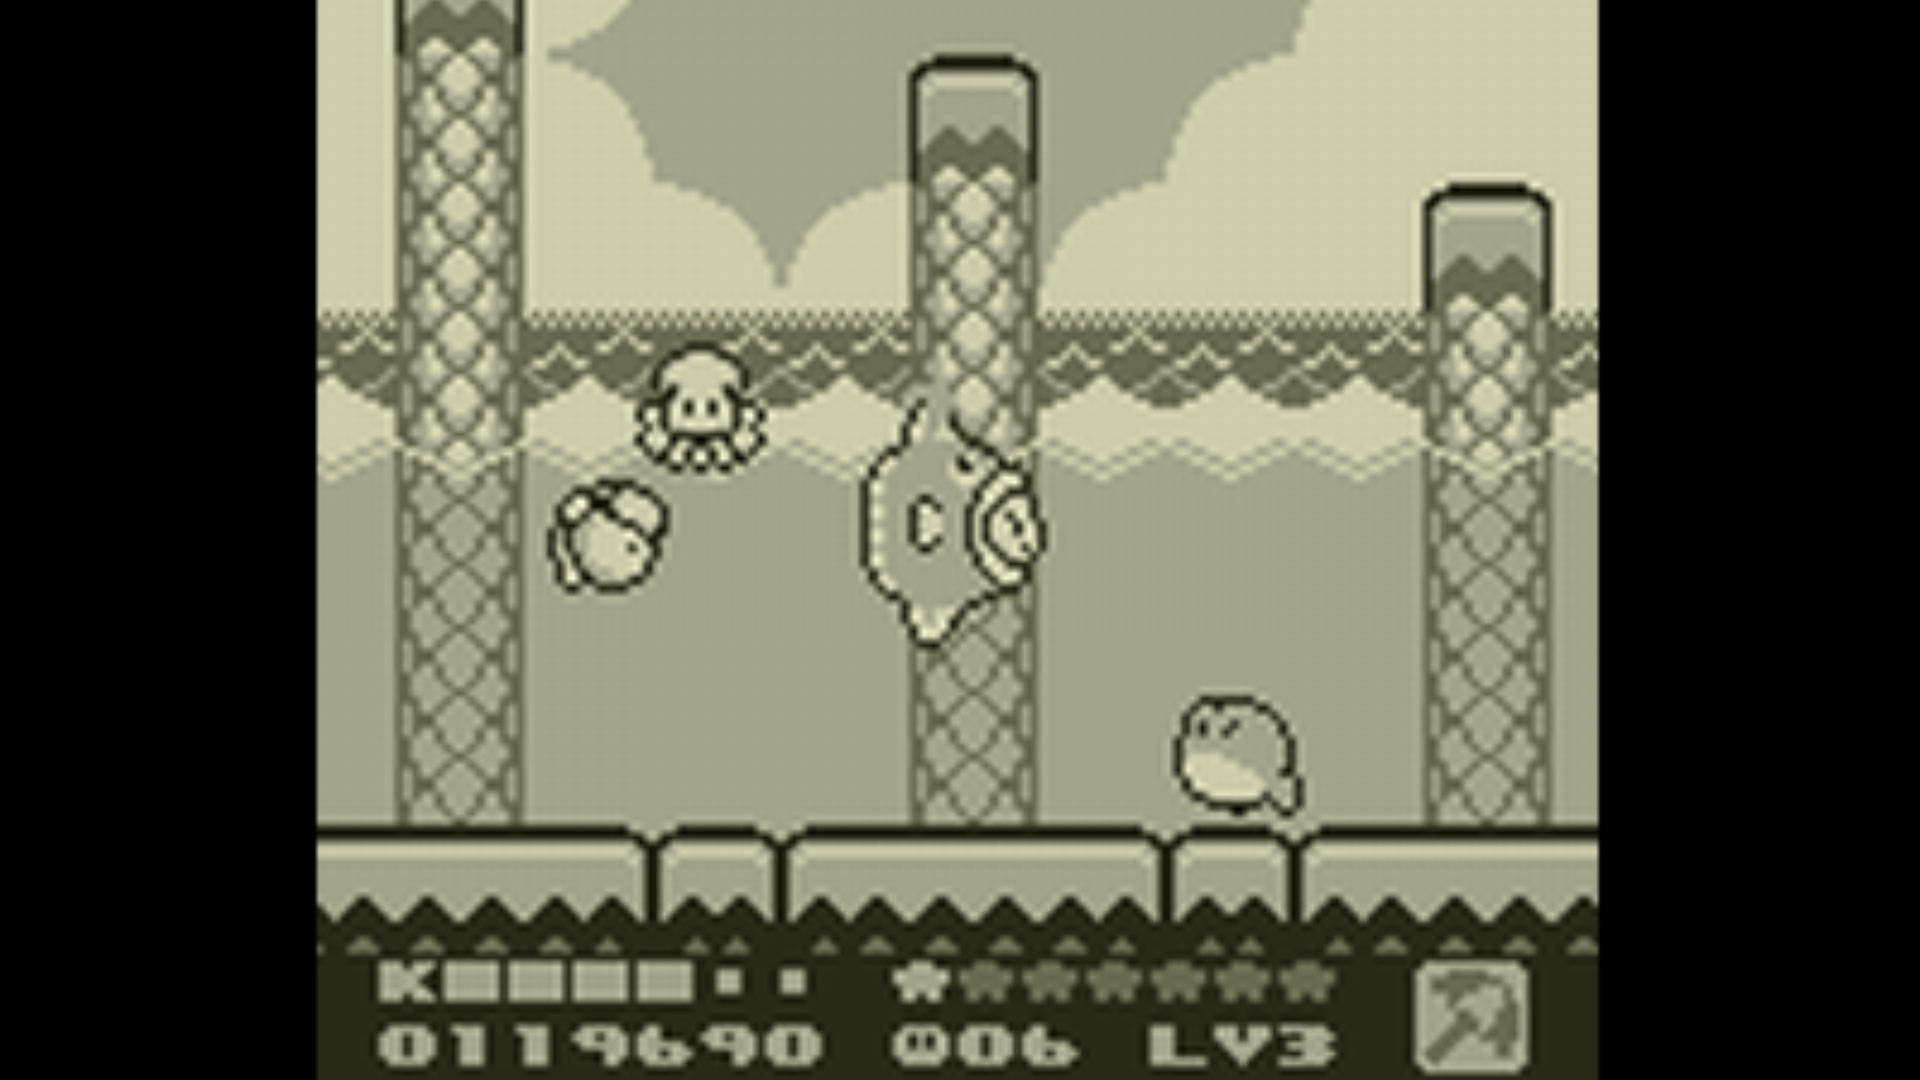 Best Kirby games: Kirby's Dream Land 2. Image shows Kirby swimming underwater inside his fish friend, Kine.